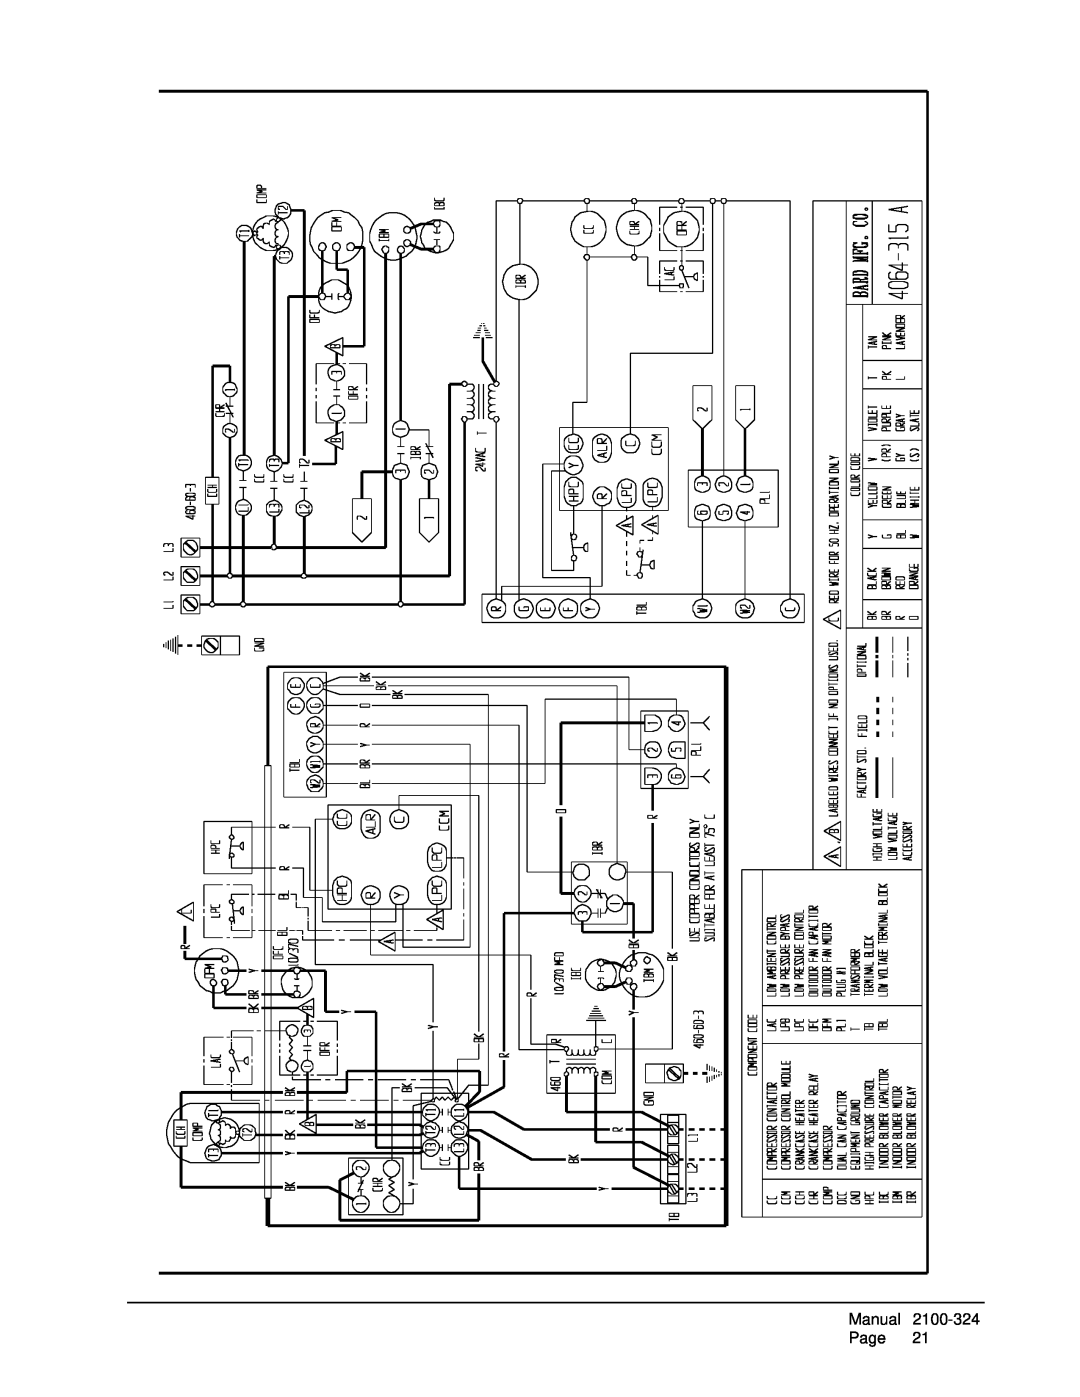 Bard P1060A1, P1148A1, P1142A3 installation instructions Manual, Page 